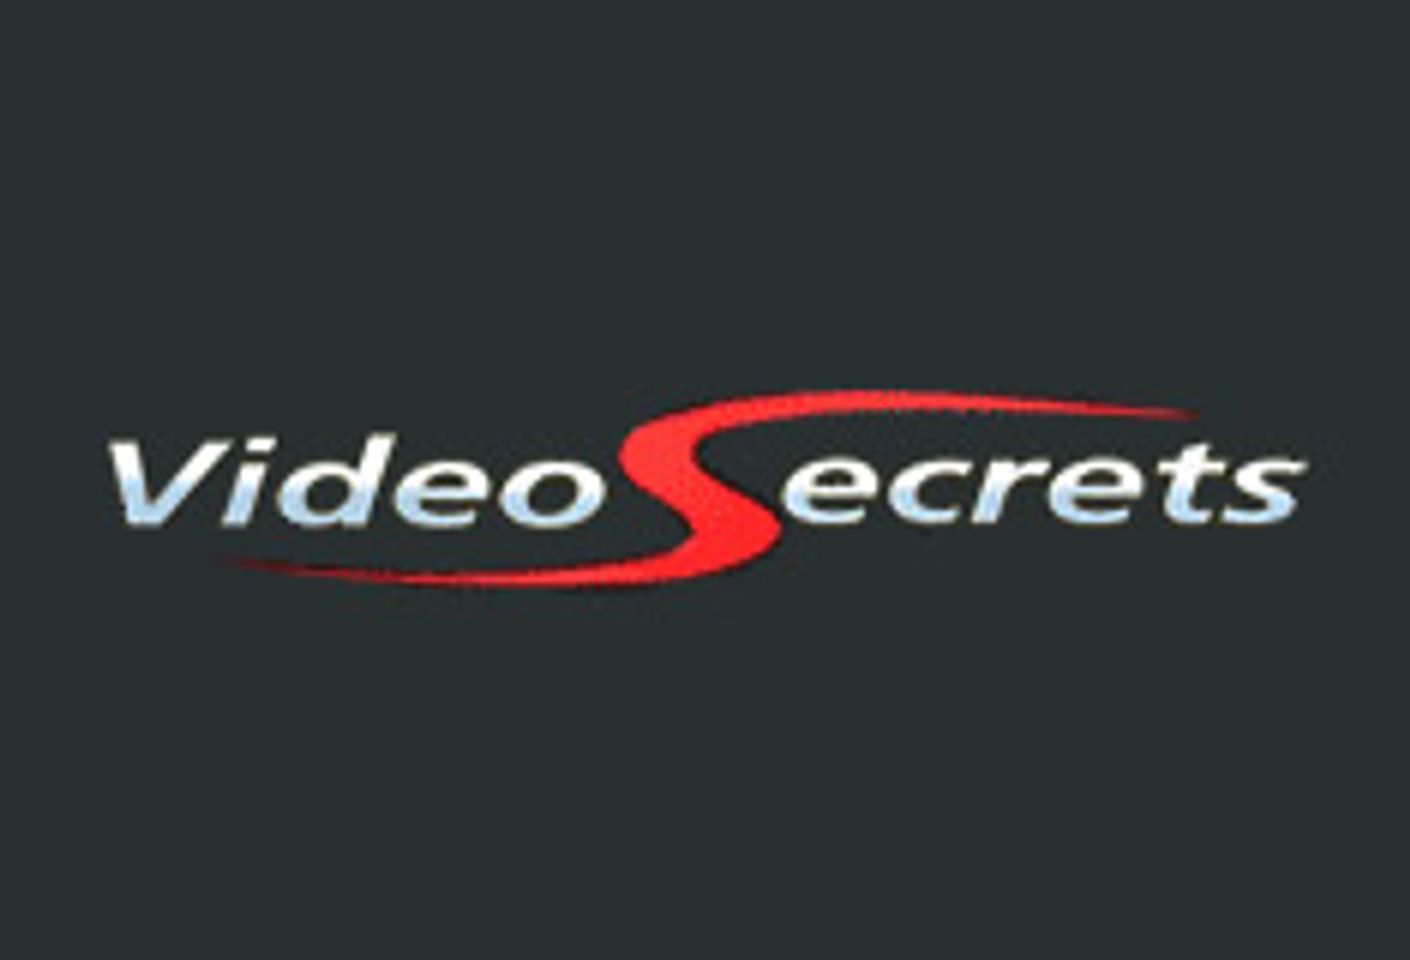 Video Secrets Selects HMoss Consulting For Expanded PR Effort